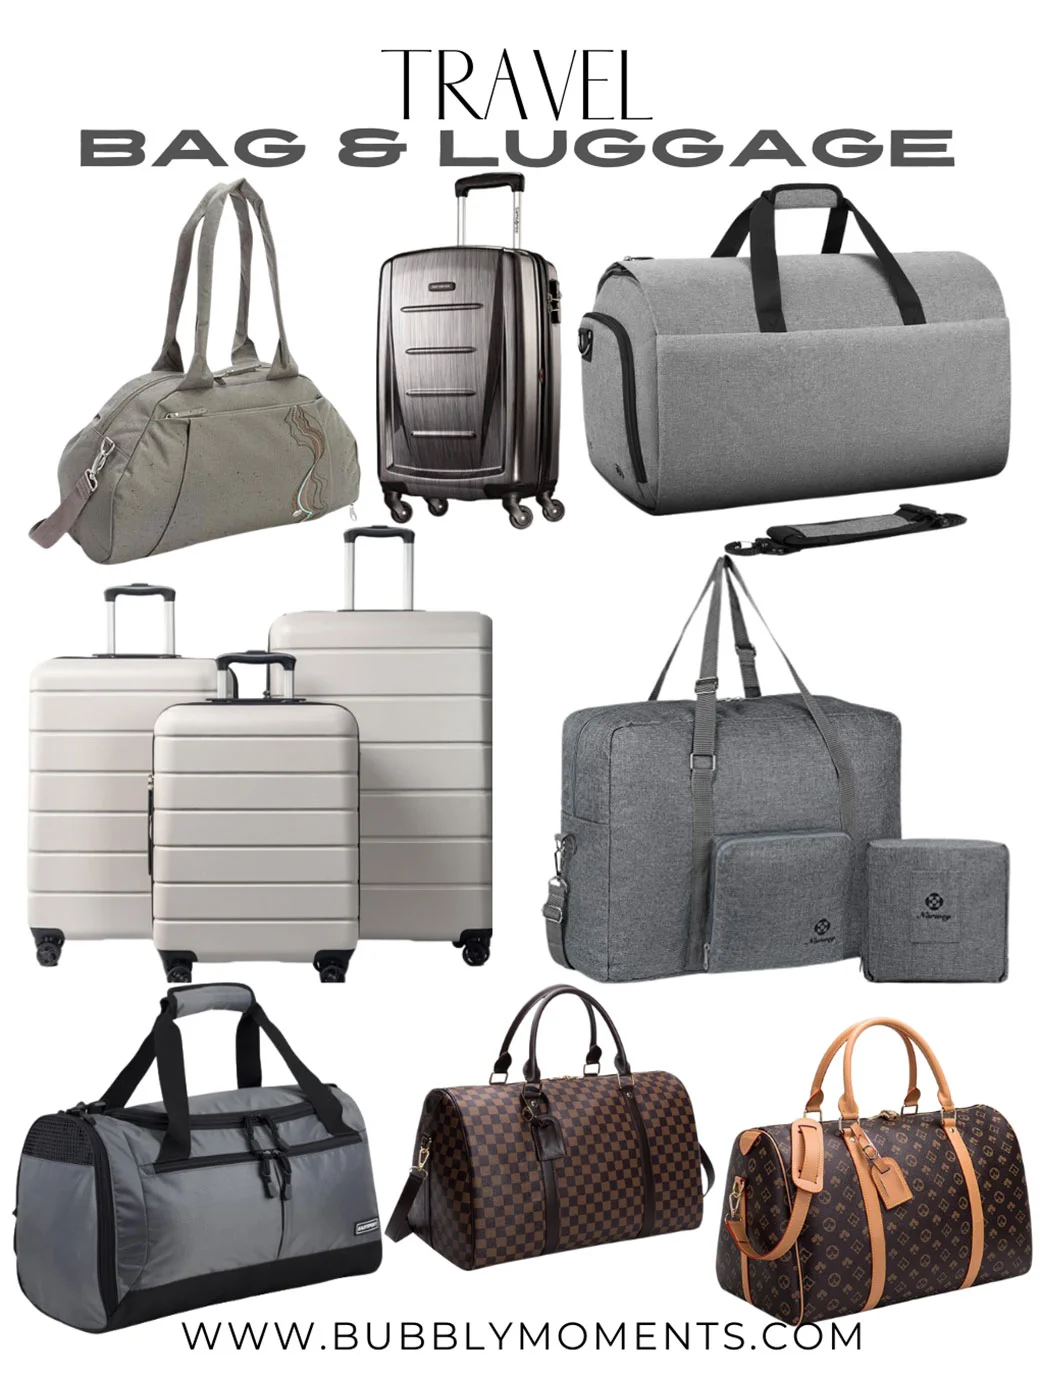 10 Trendy Luggage Bags and Women's Travel Duffel Bags to Shop